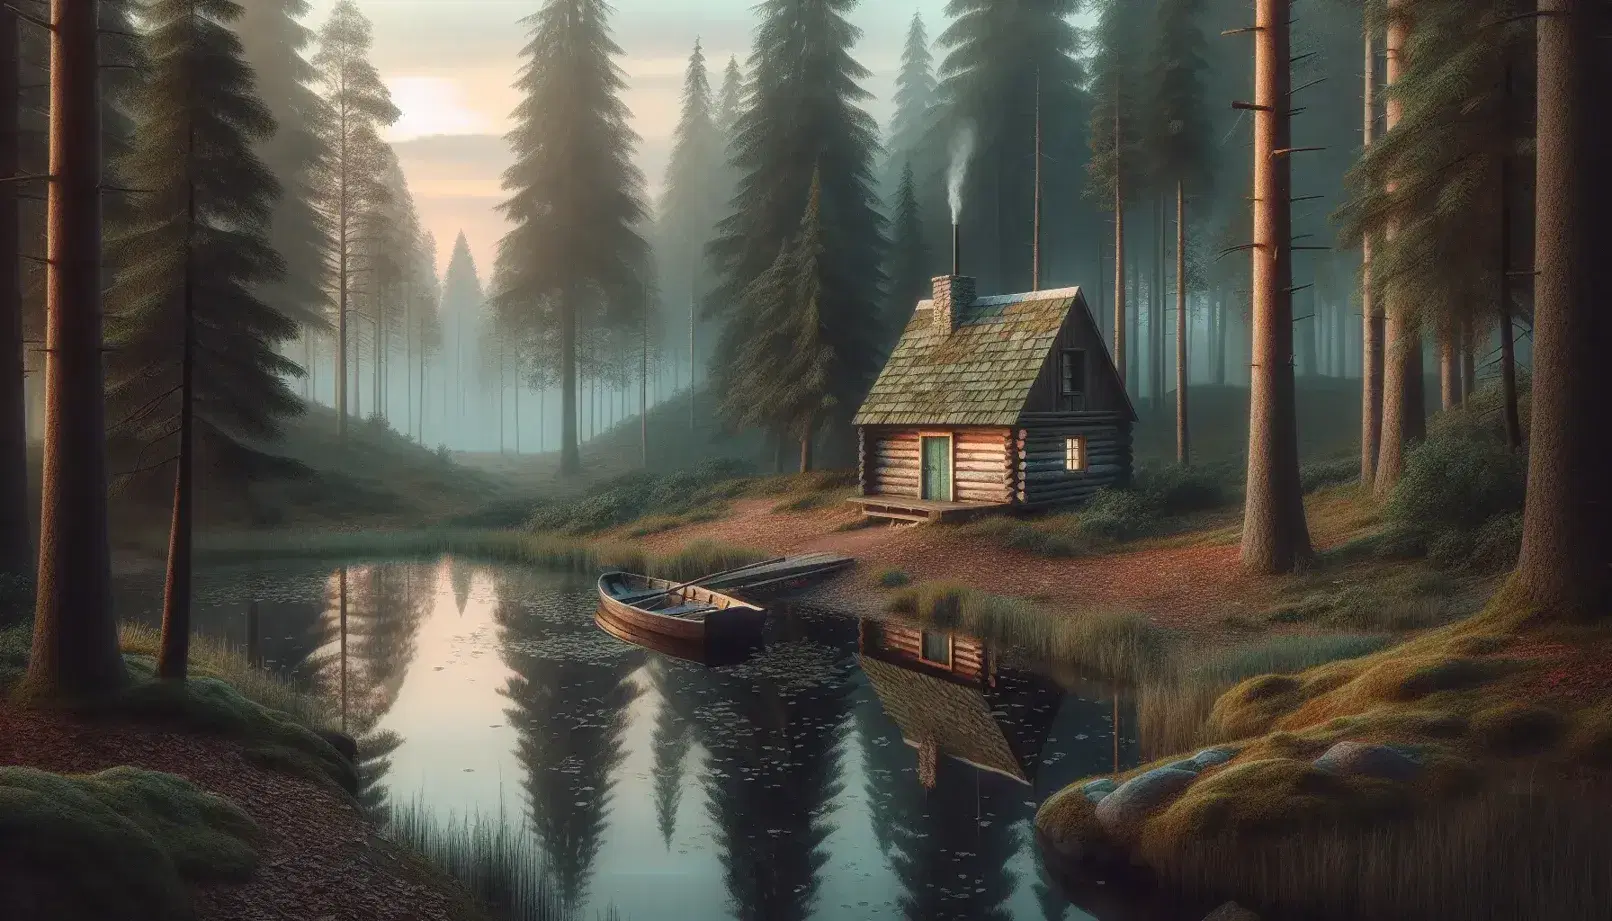 Serene dawn woodland scene with a rustic cabin amid green trees, smoke from chimney, still pond with rowboat, and a colorful sunrise sky.